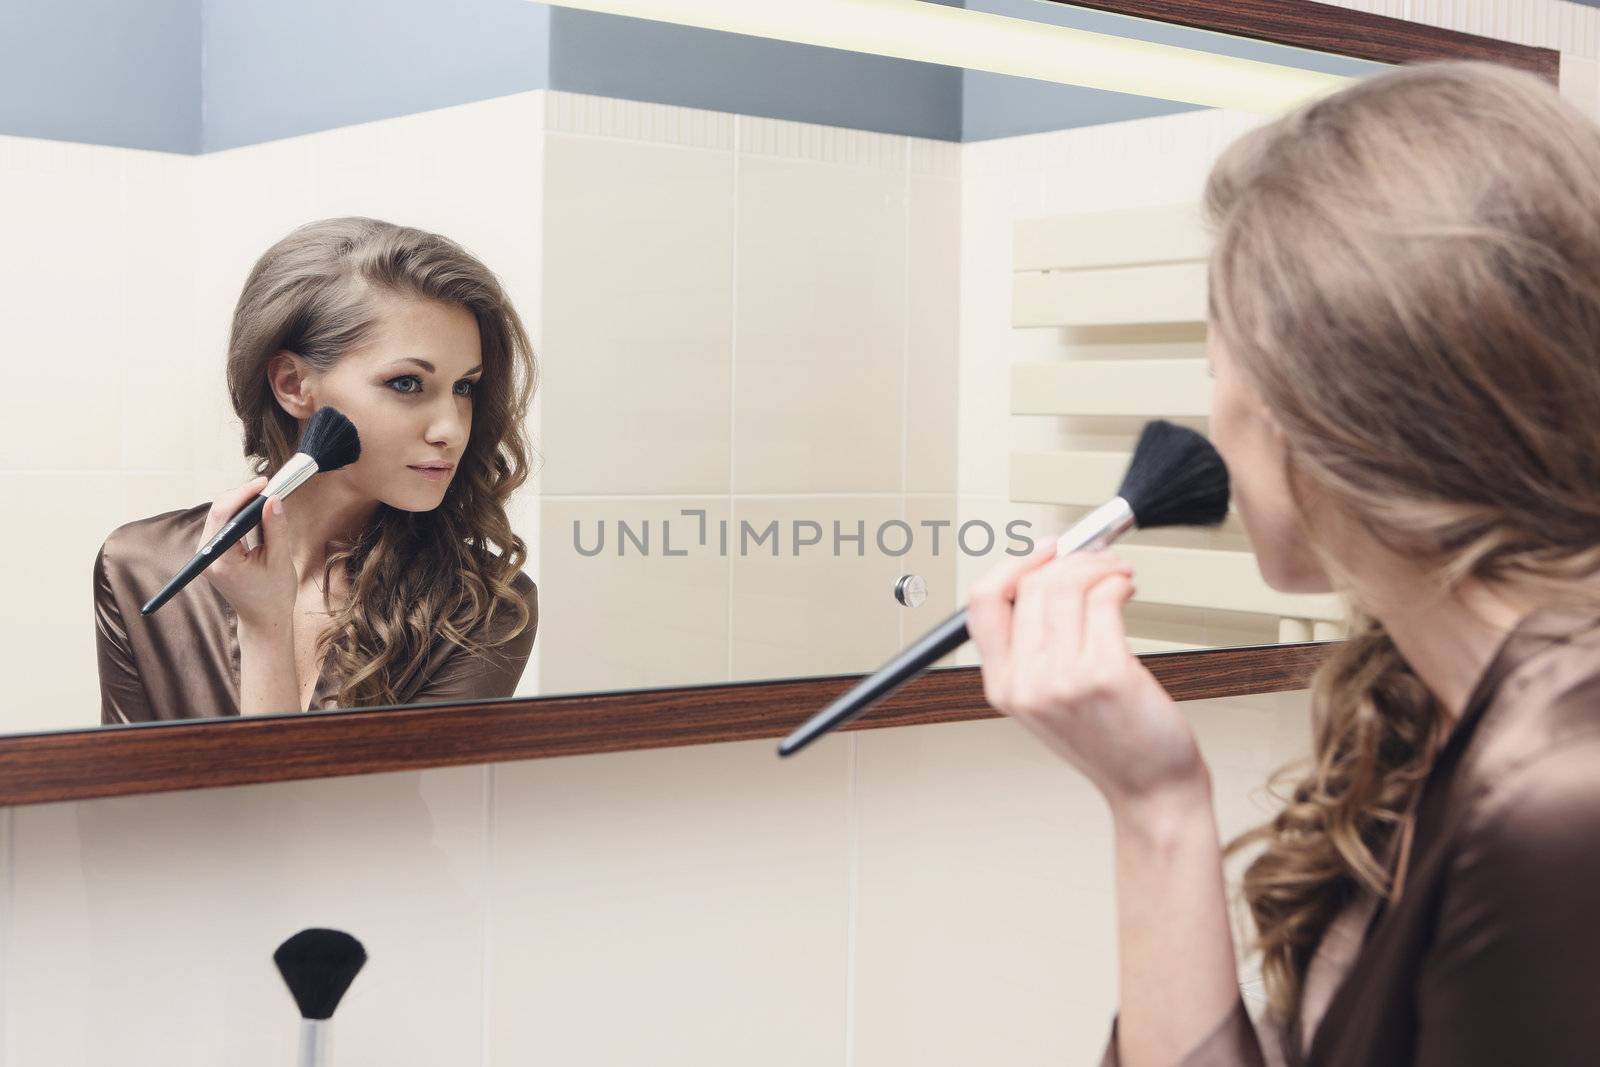 The young beautiful girl does makeup by robert_przybysz